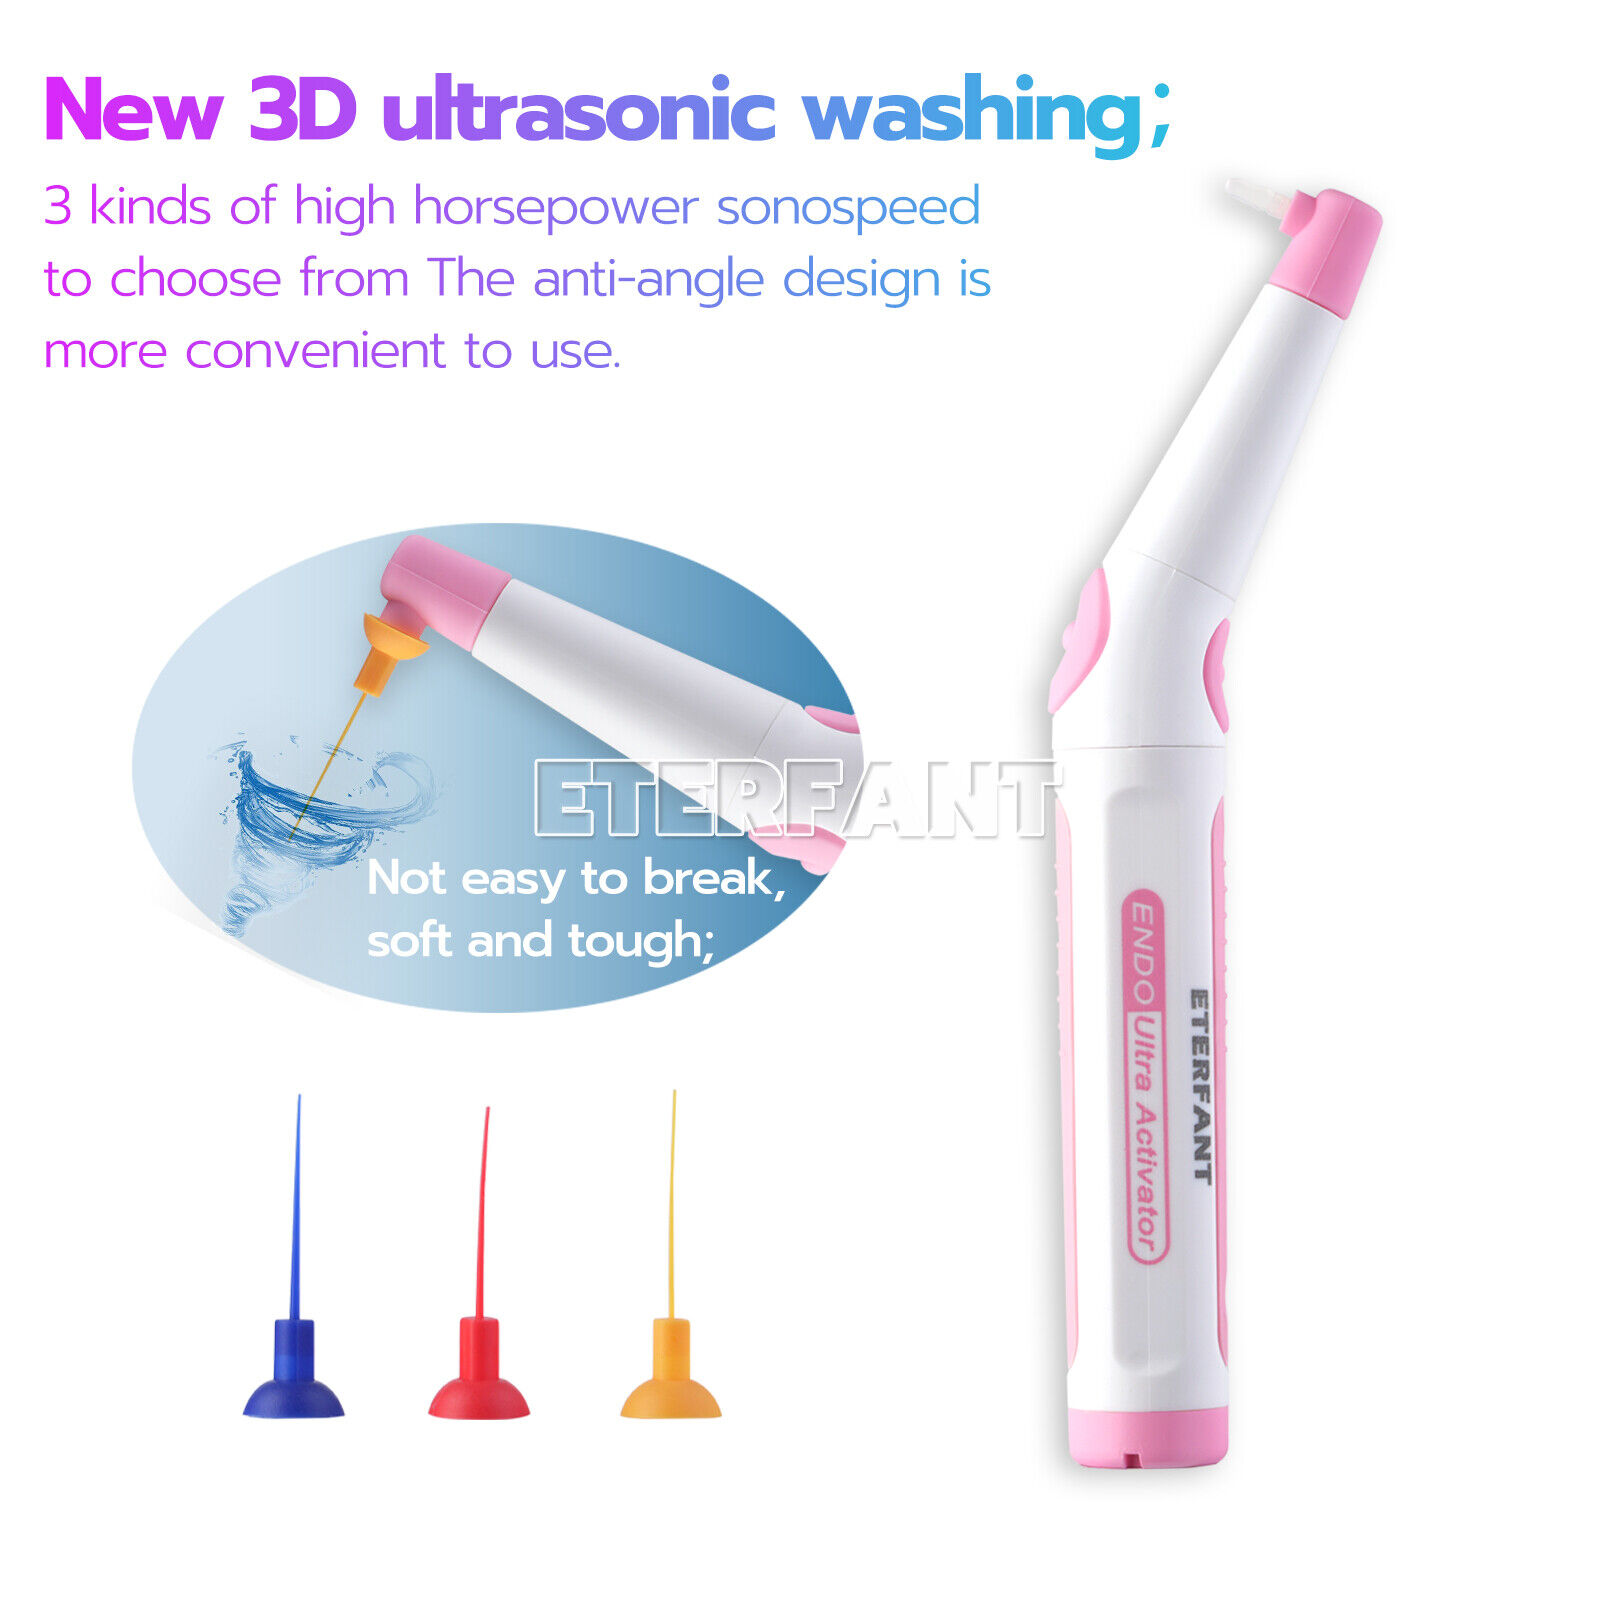 2xETERFANT Endo Sonic Activator Dental Root Canal Irrigator Ultrasonic+60Tips